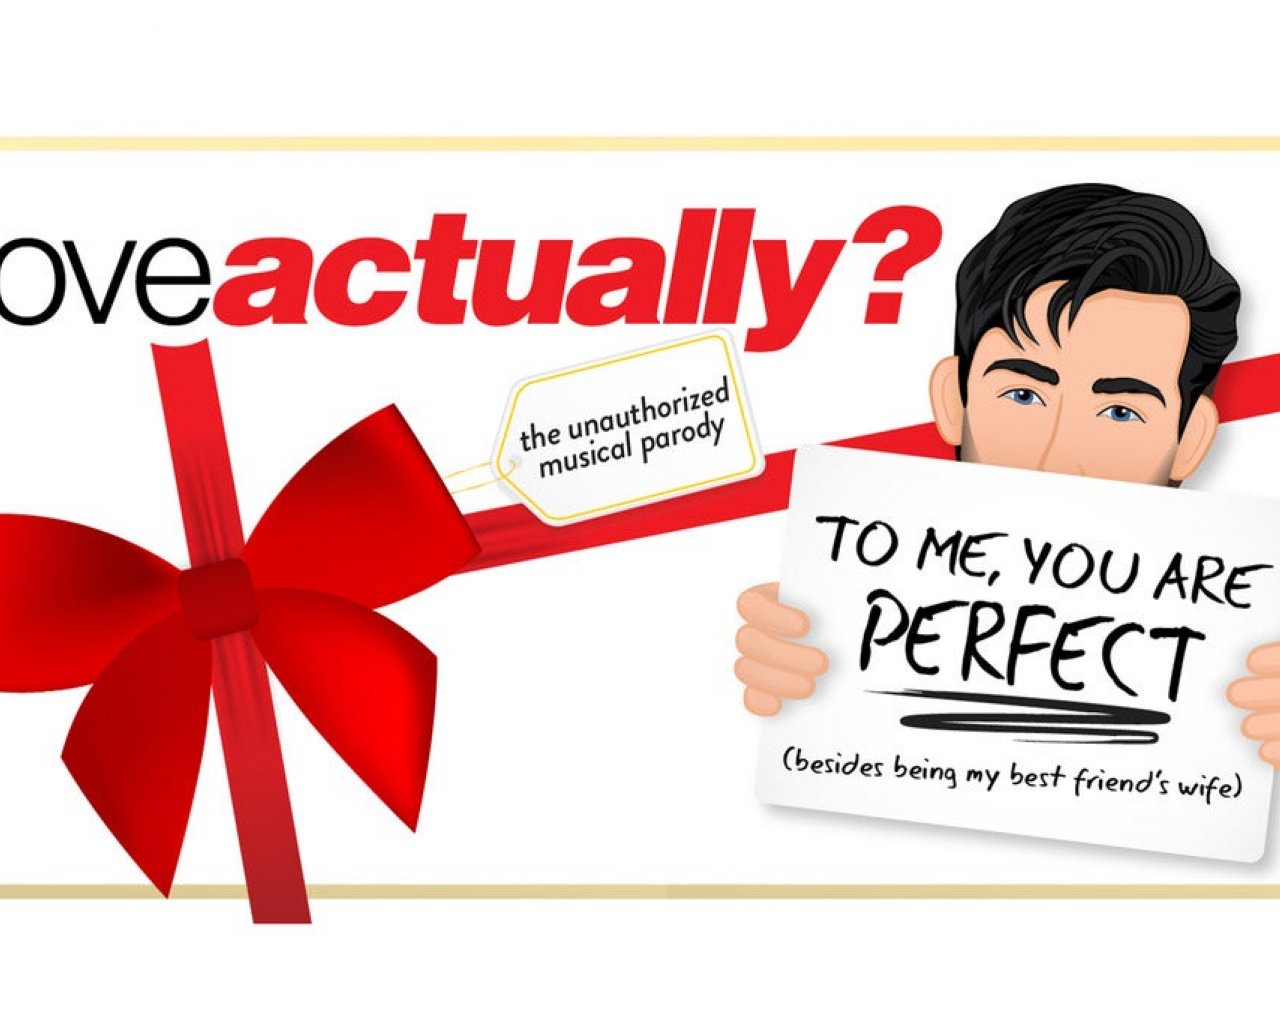 Love Actually The Unauthorized Musical Parody